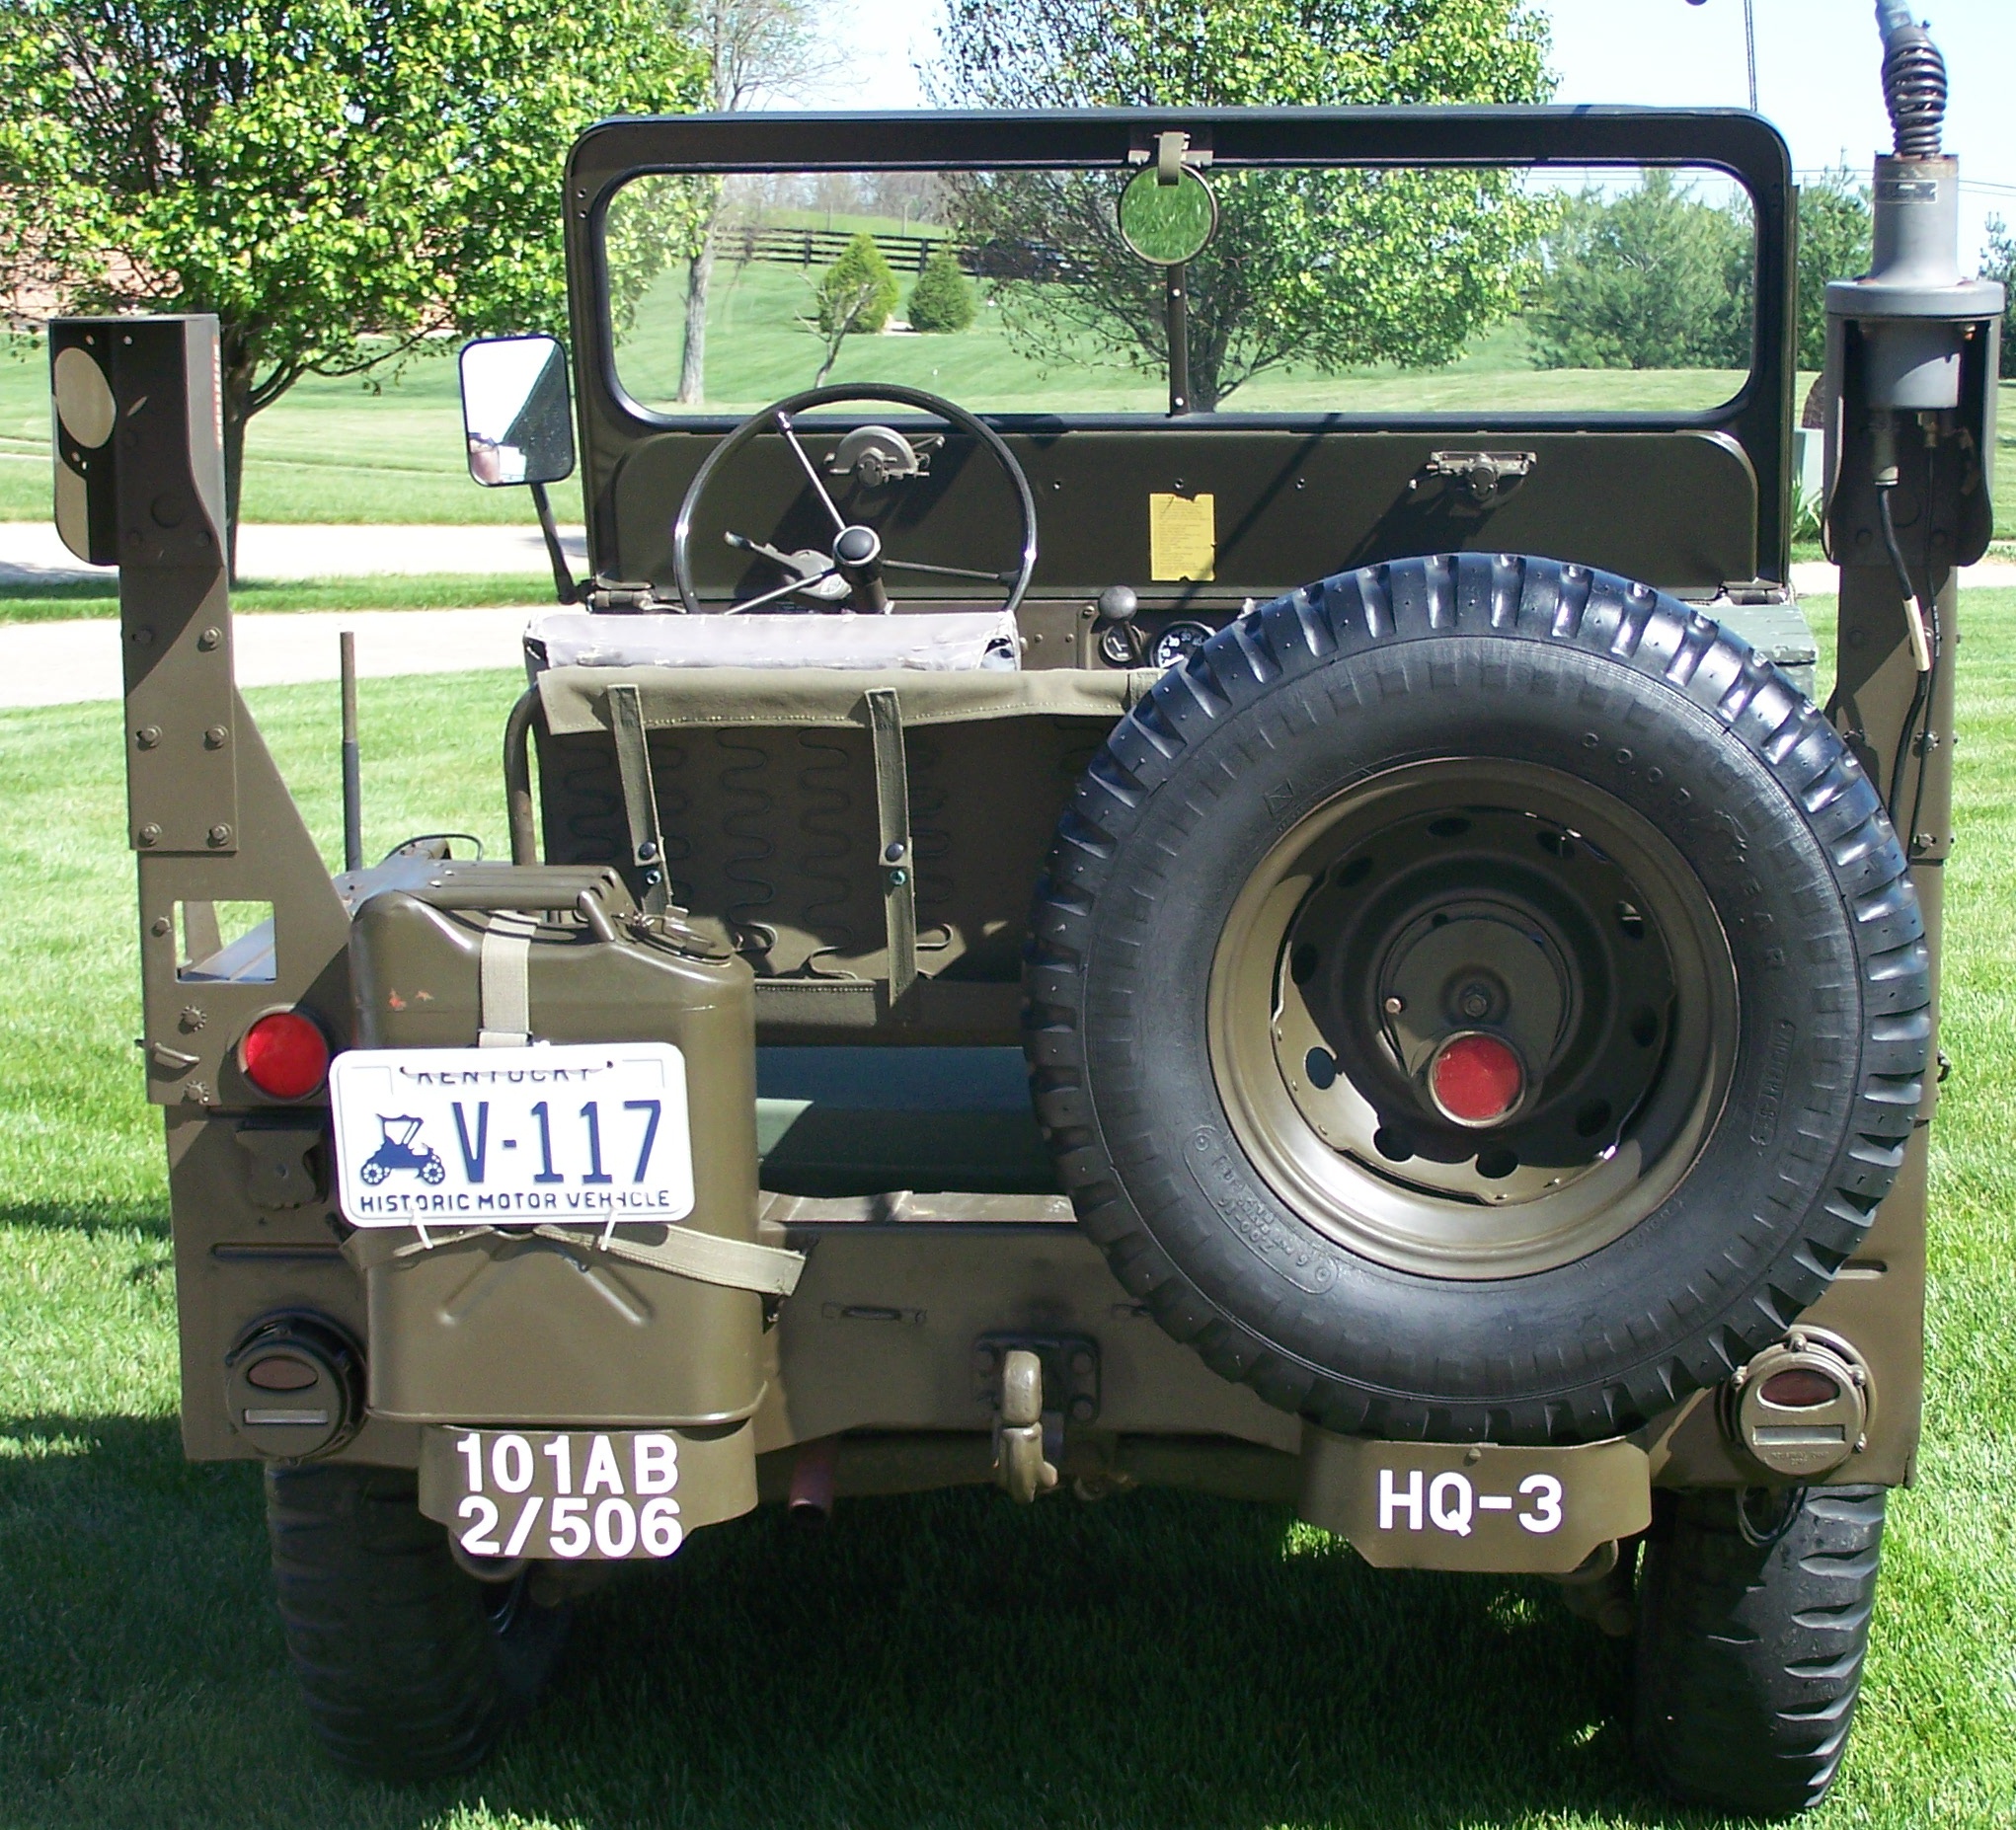 M151 canadian military jeep #5